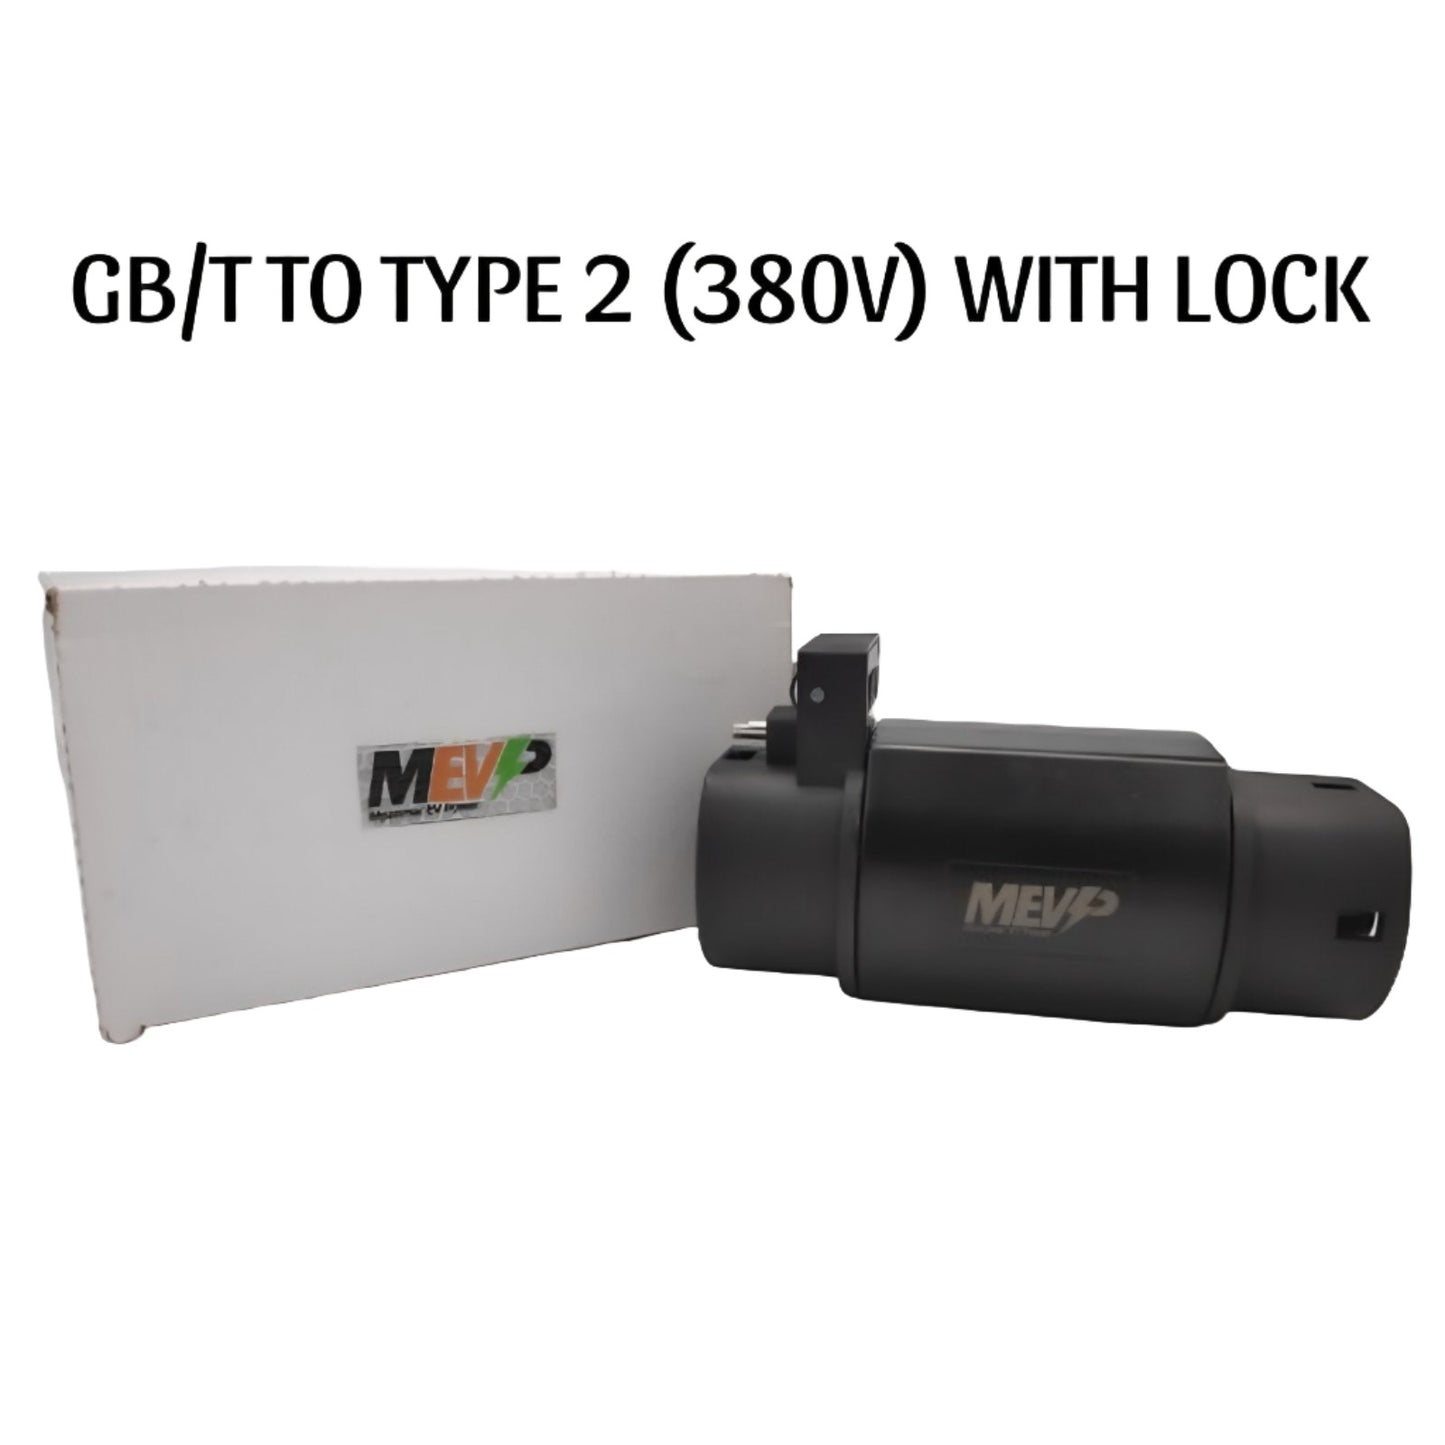 GB/T TO TYPE 2 (380V) WITH LOCK EV ADAPTERS